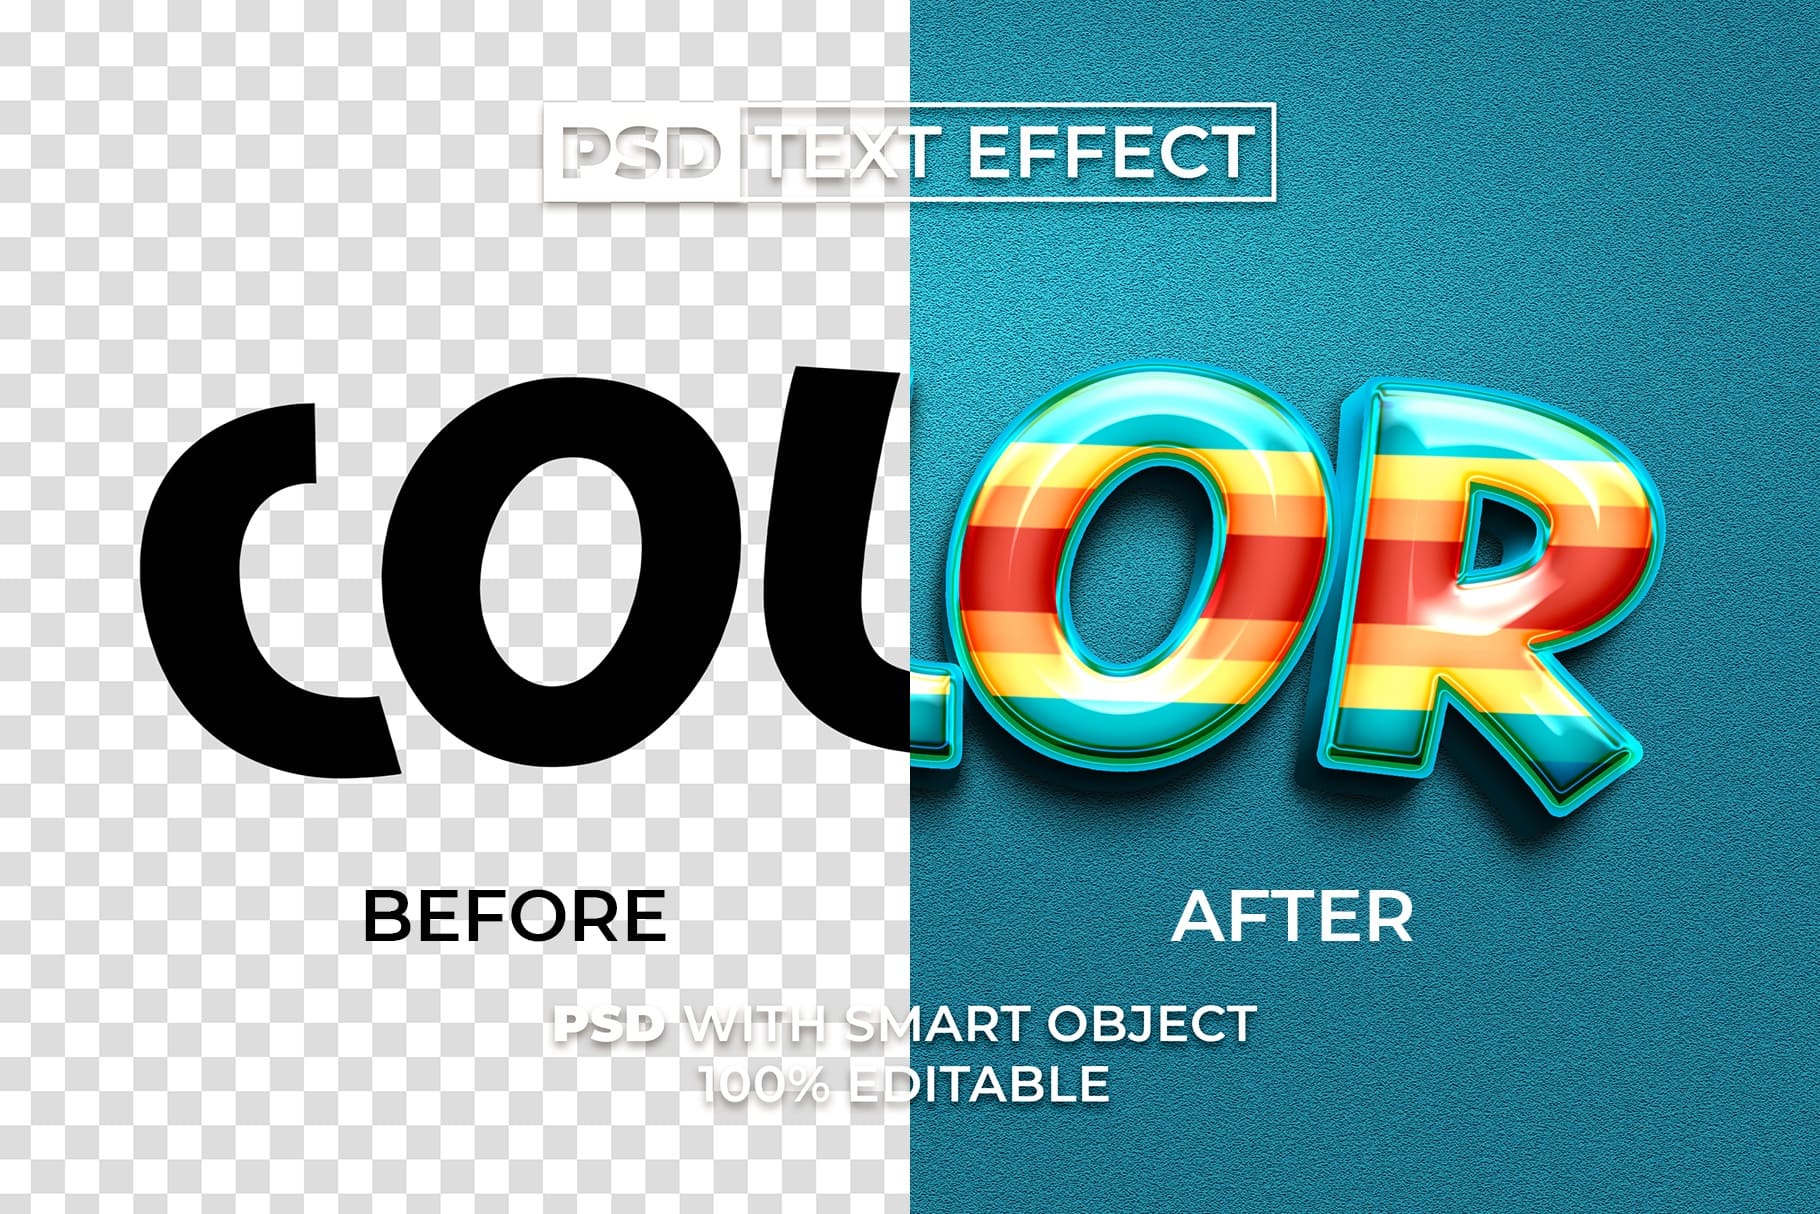 Set of 3d text effects for photoshopped.